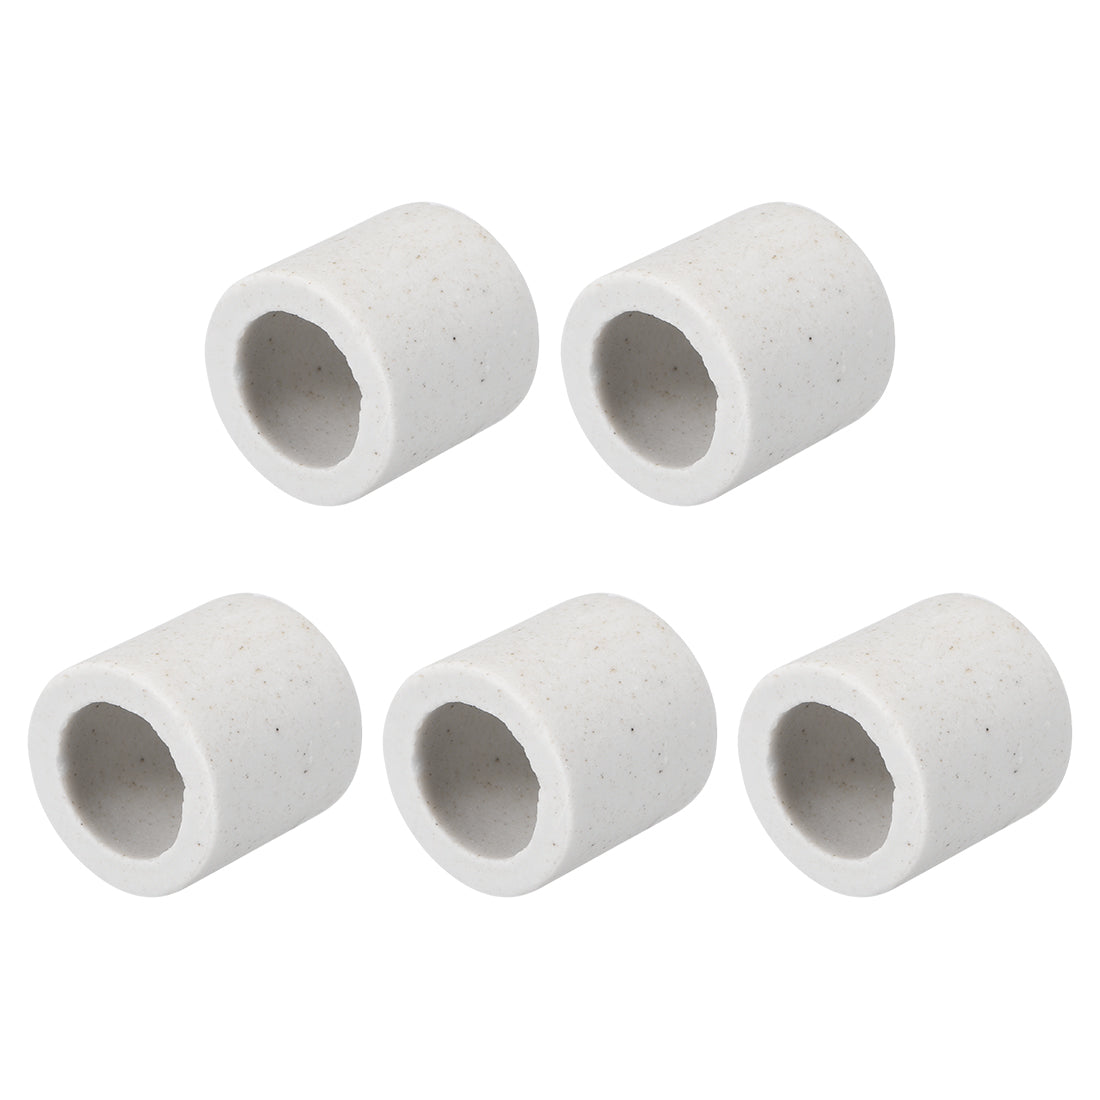 uxcell Uxcell 10mm Dia Ceramic Insulation Tube Single Bore Porcelain Insulator Pipe 5 Pcs